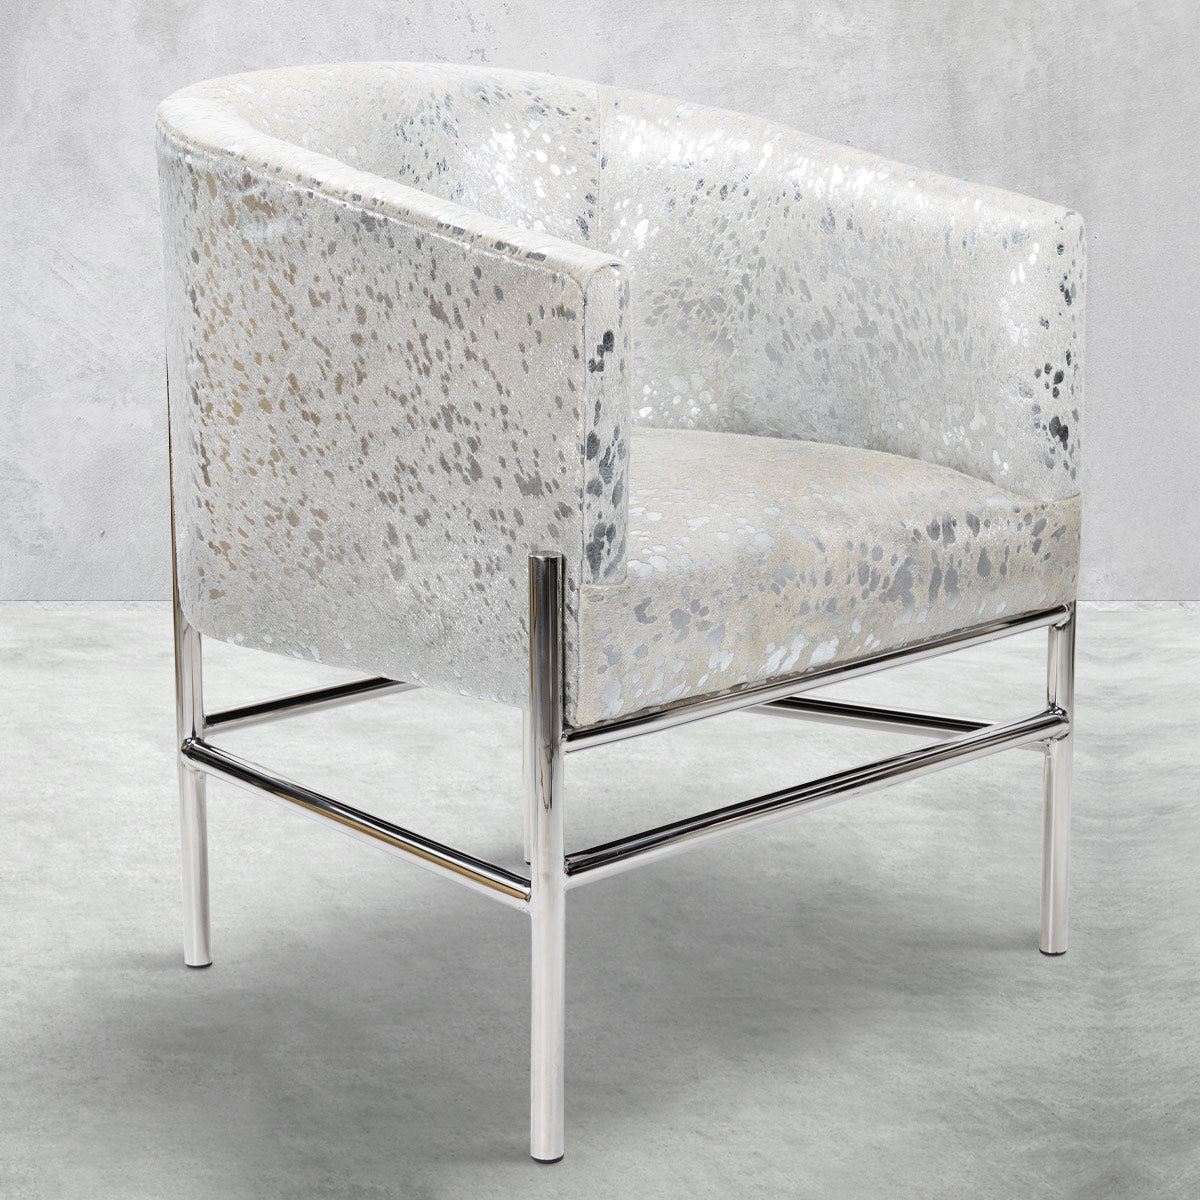 Capri Dining Chair in Silver Speckled Cowhide